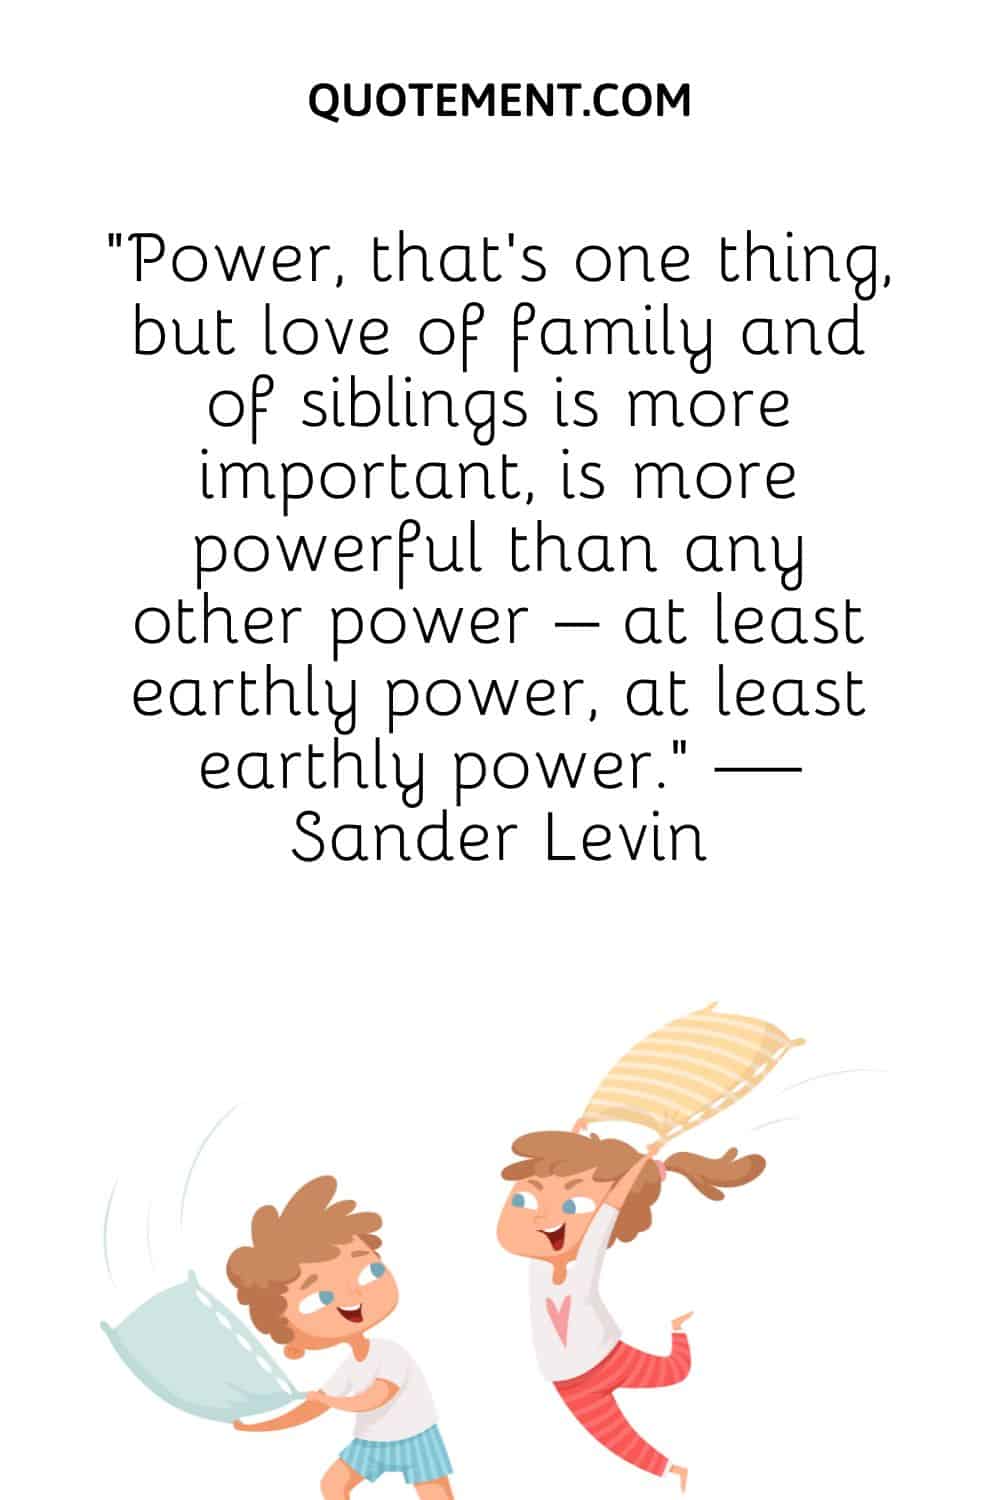 Power, that’s one thing, but love of family and of siblings is more important, is more powerful than any other power